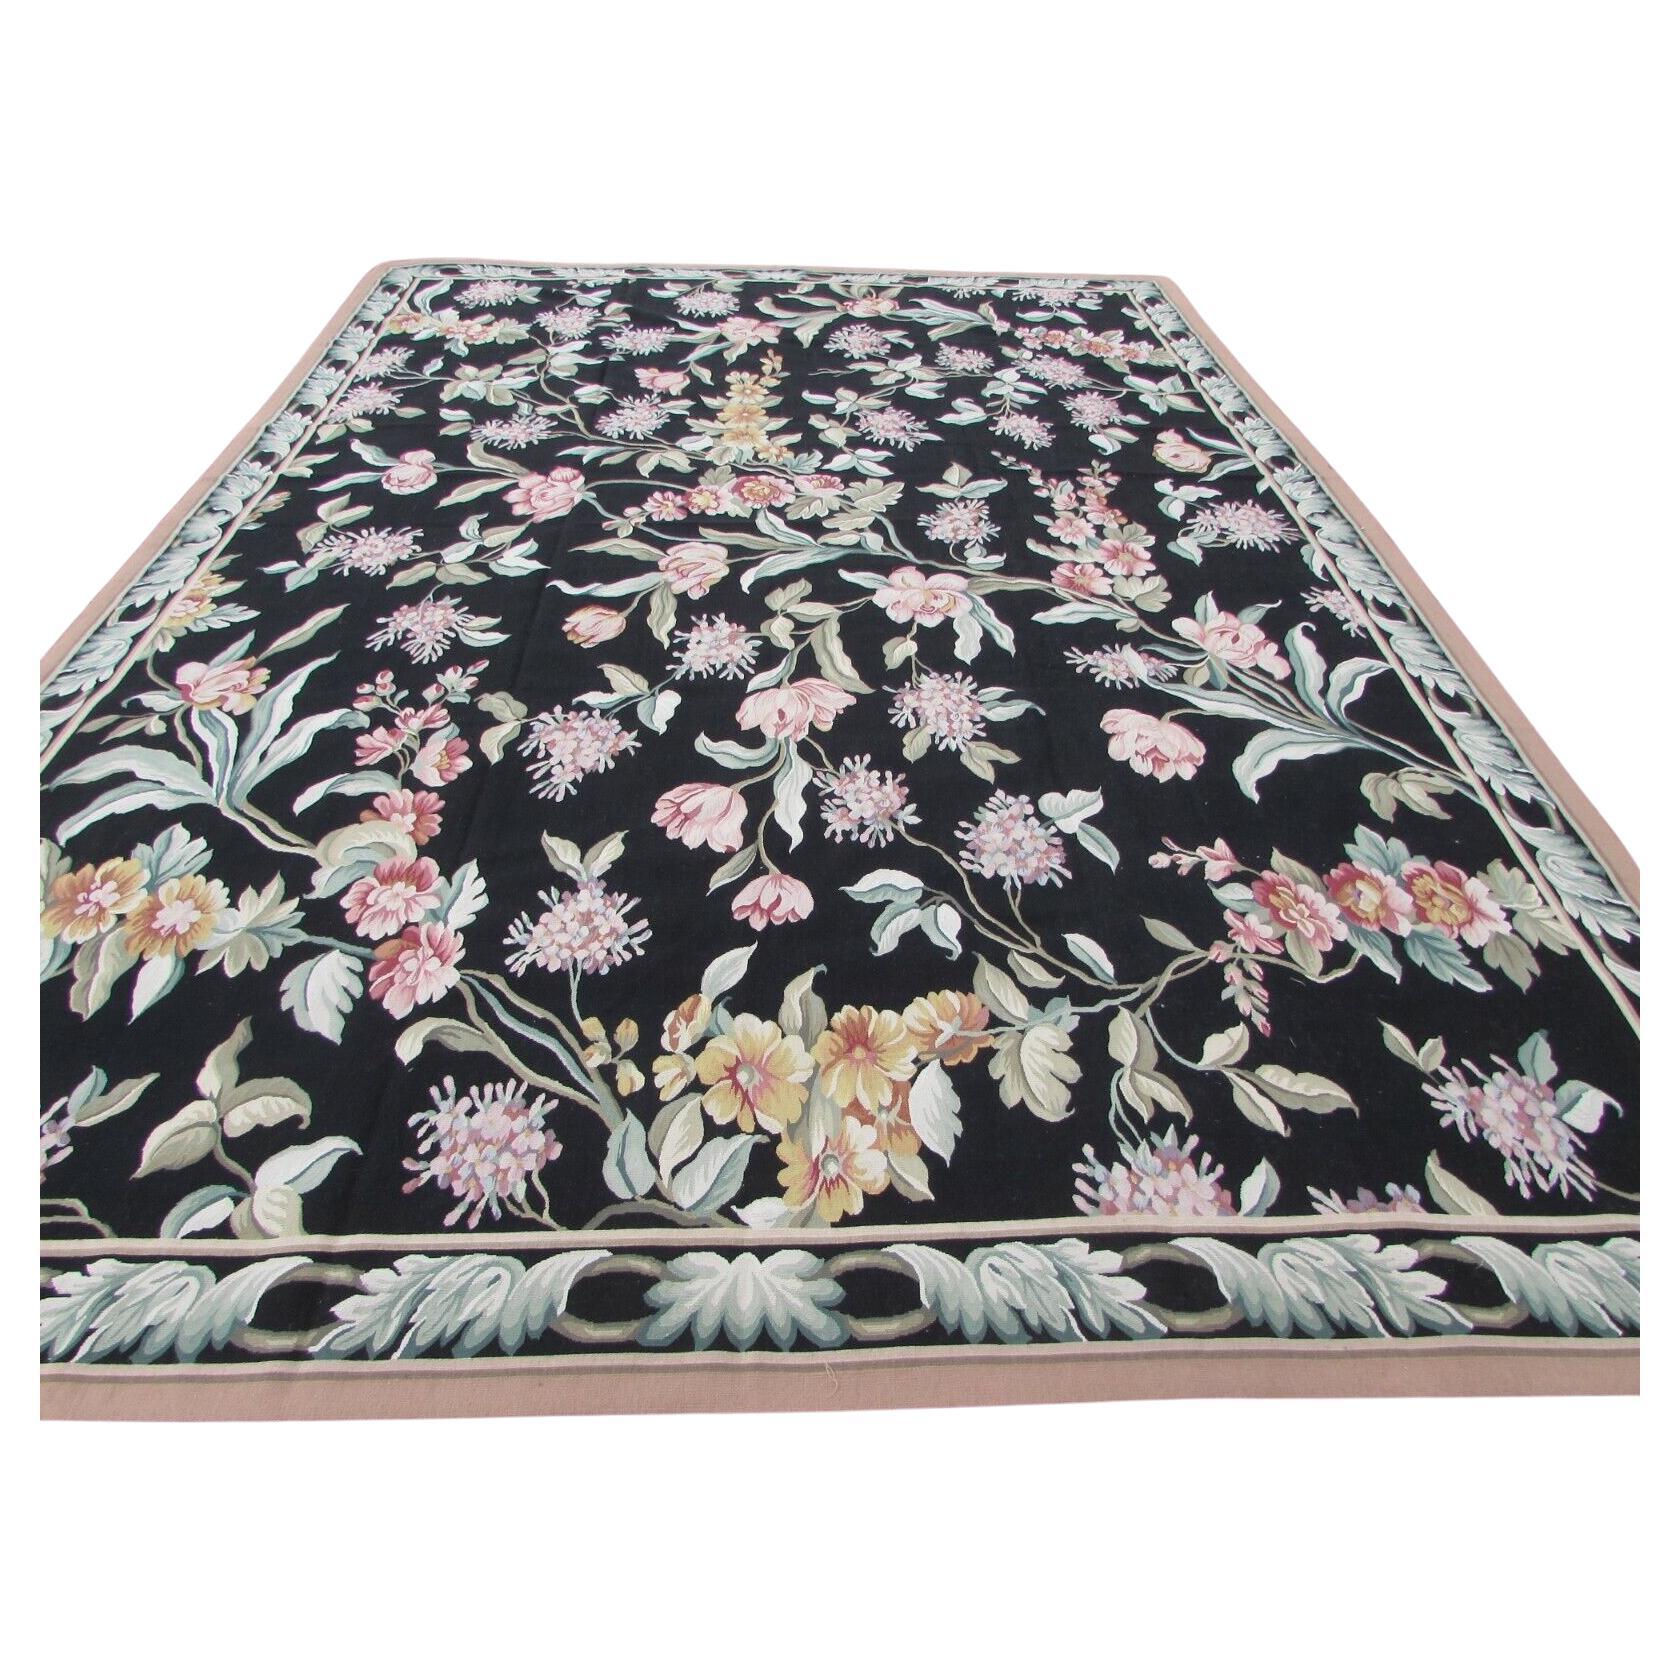 Handmade Vintage French Aubusson Rug 8.8' x 12.2', 1970s, 1Q51 For Sale